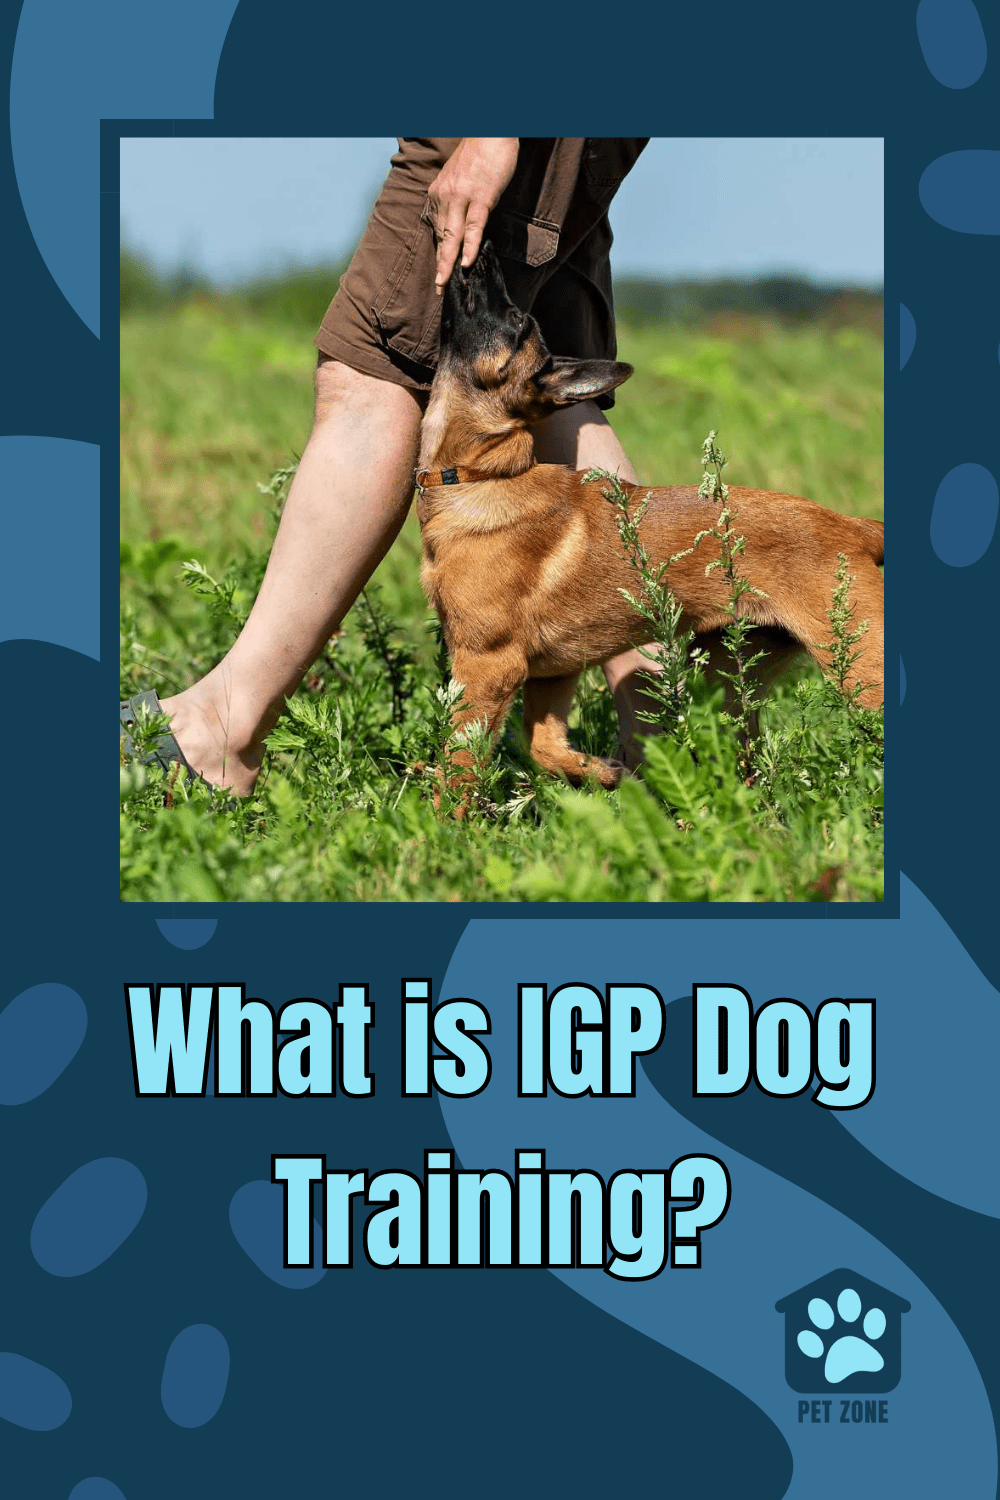 What is IGP Dog Training?